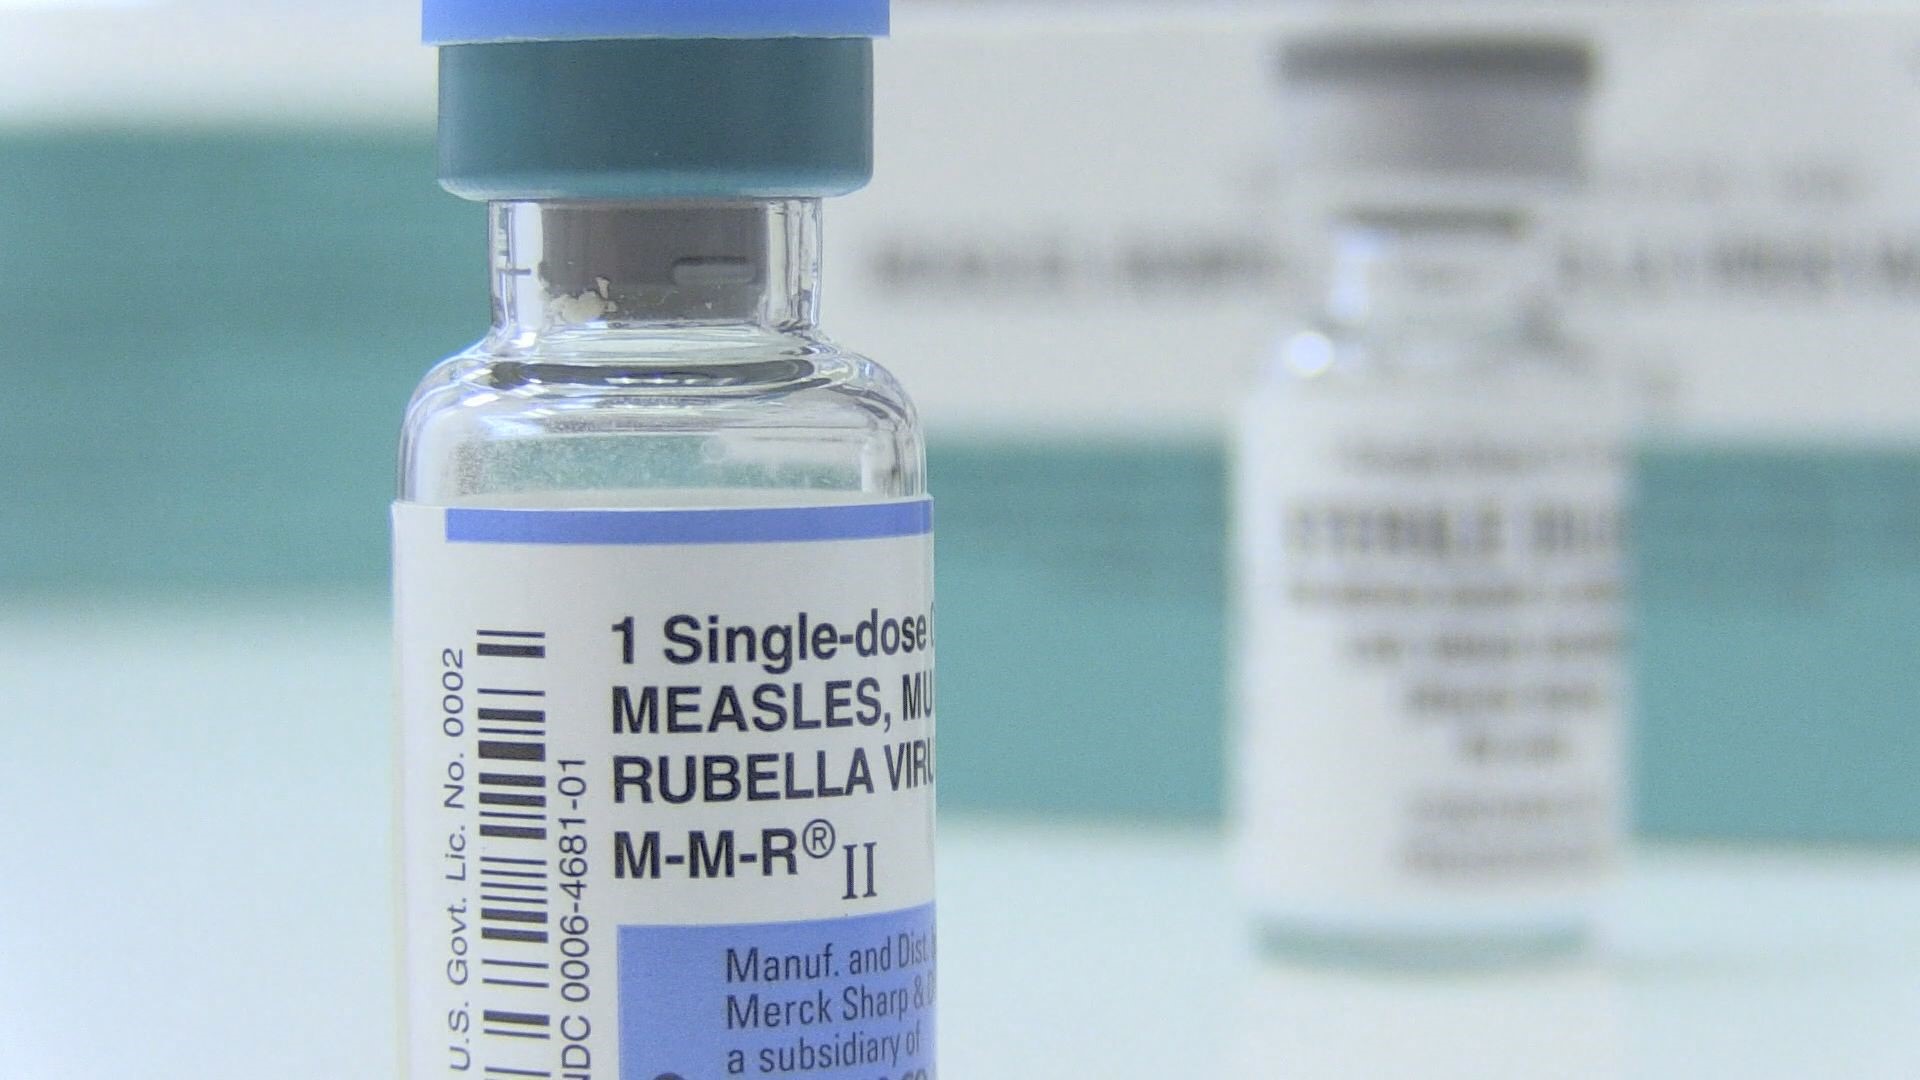 The CDC said more than 22 million infants worldwide have missed their first dose of the measles vaccine during the pandemic.